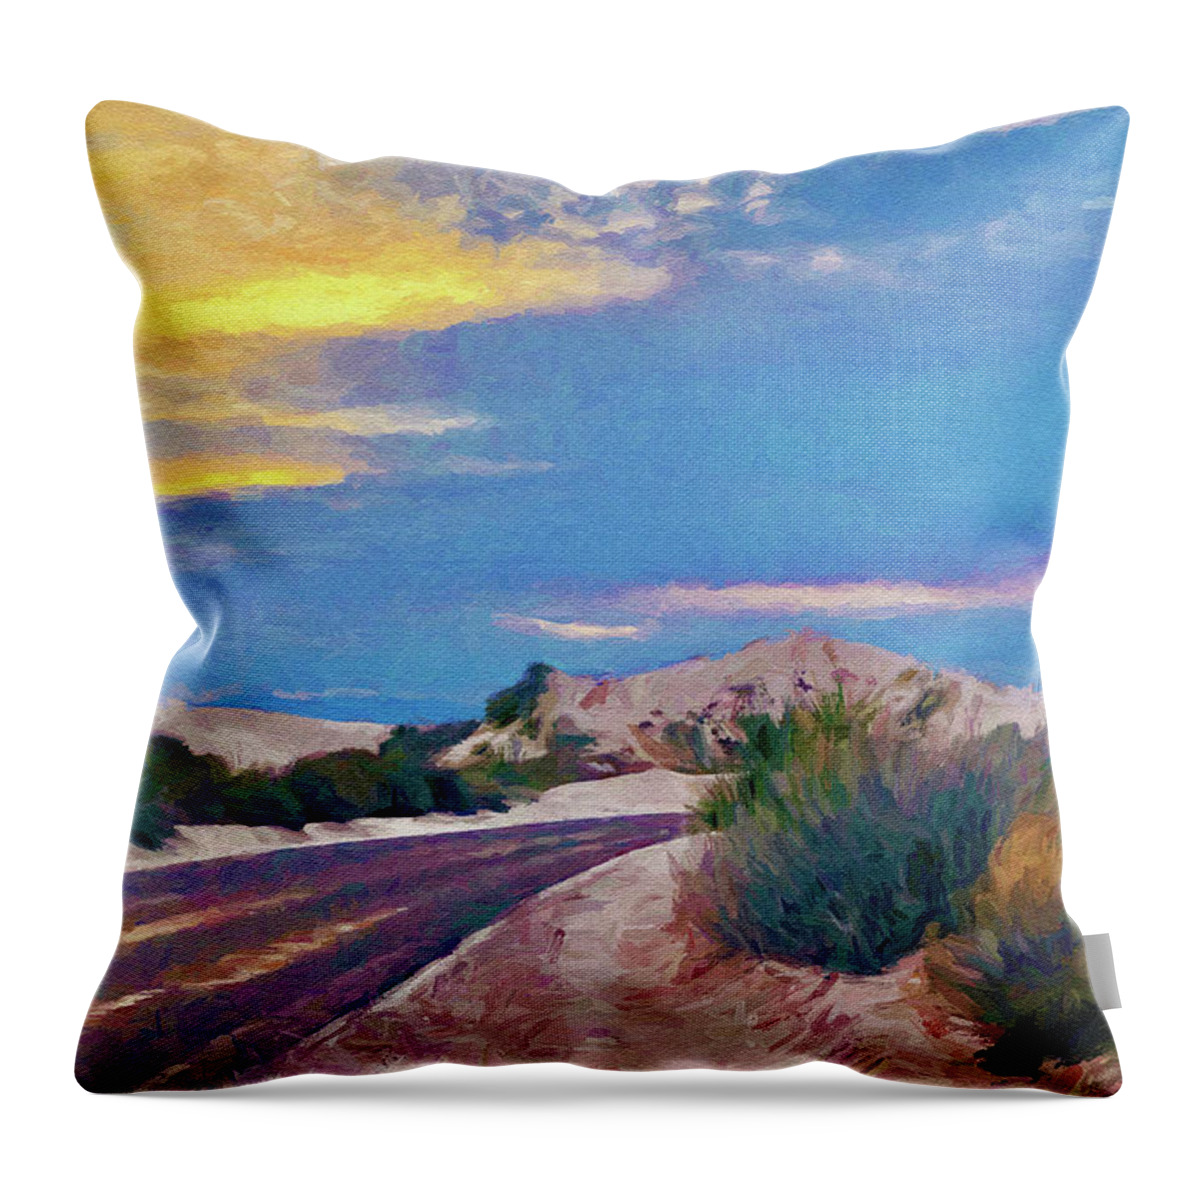 White Sands Throw Pillow featuring the digital art White Sands New Mexico at Dusk Painting by Tatiana Travelways